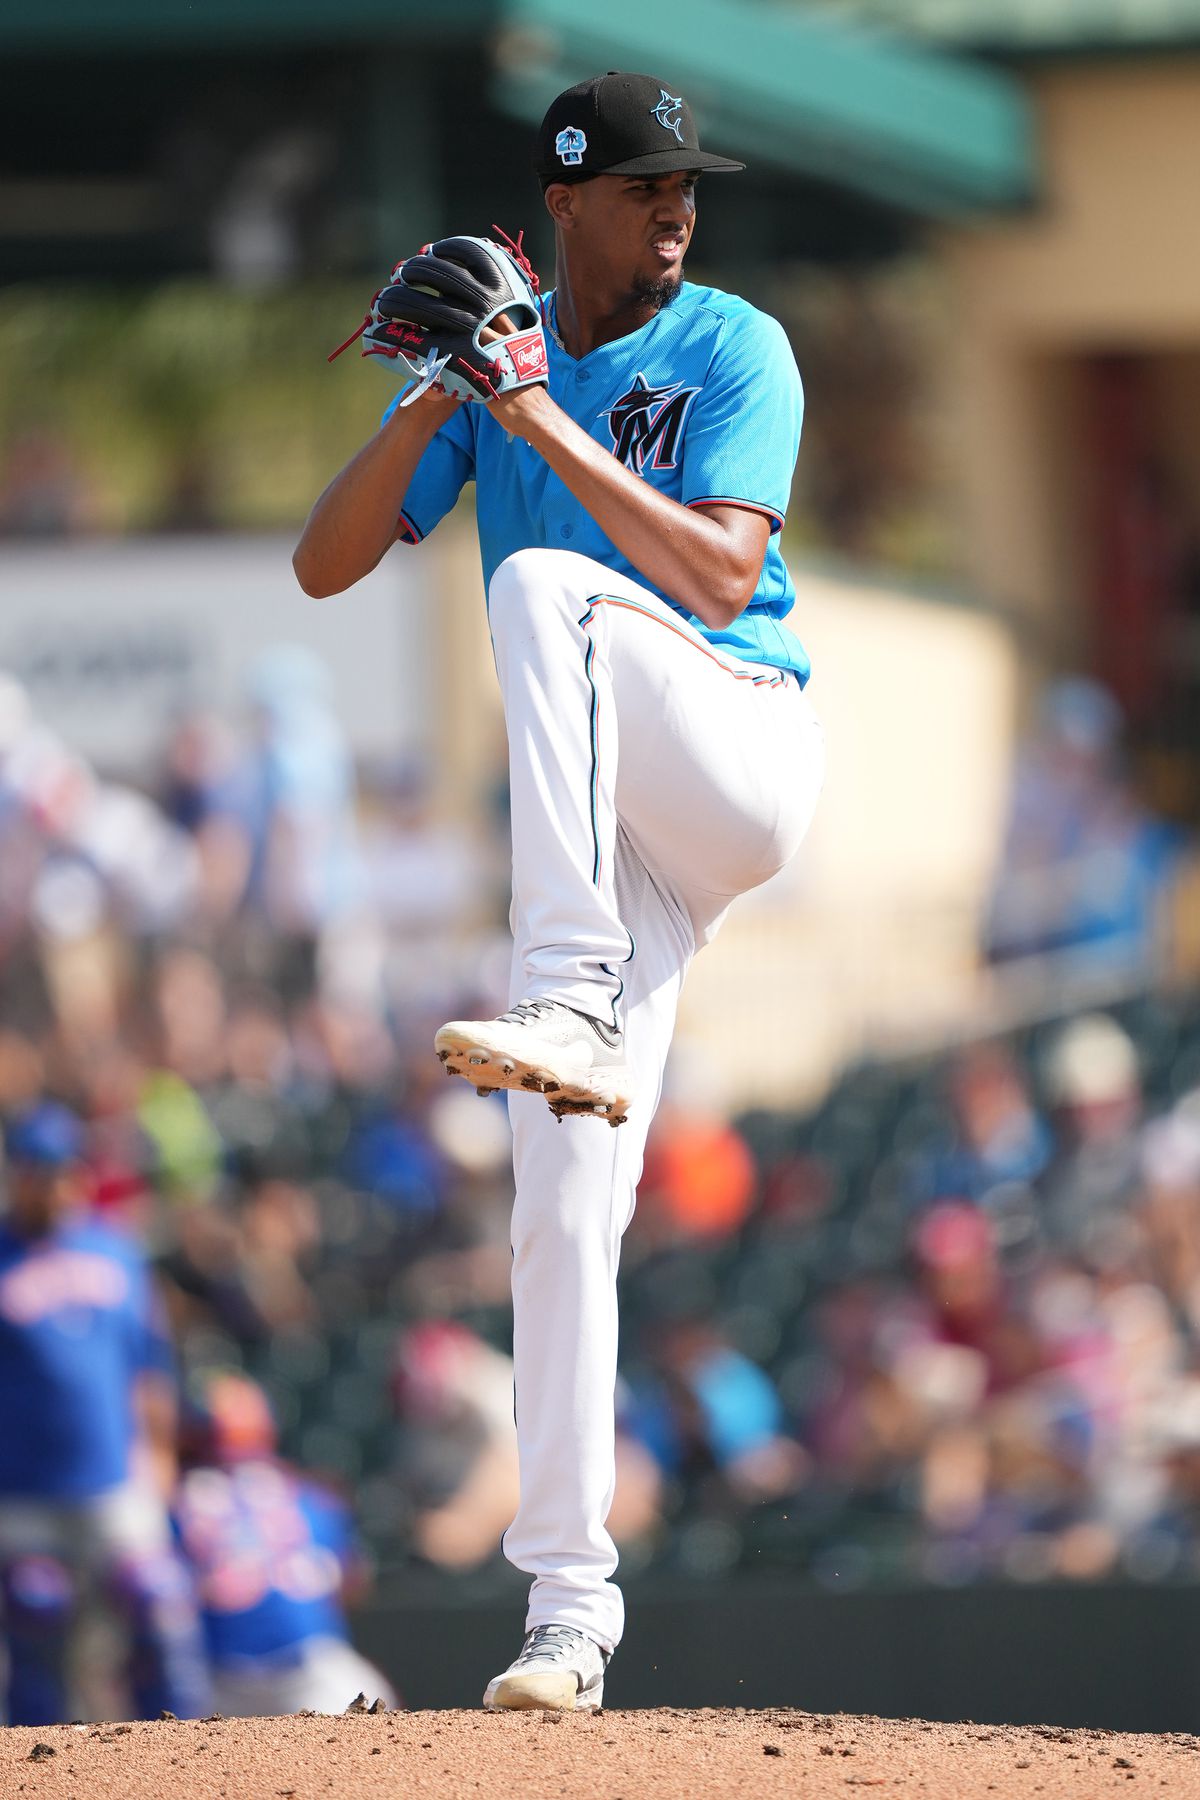 Eury Pérez #76 of the Miami Marlins prepares to deliver a pitch in the game against the New York Mets at Roger Dean Stadium on March 4, 2023 in Jupiter, Florida.